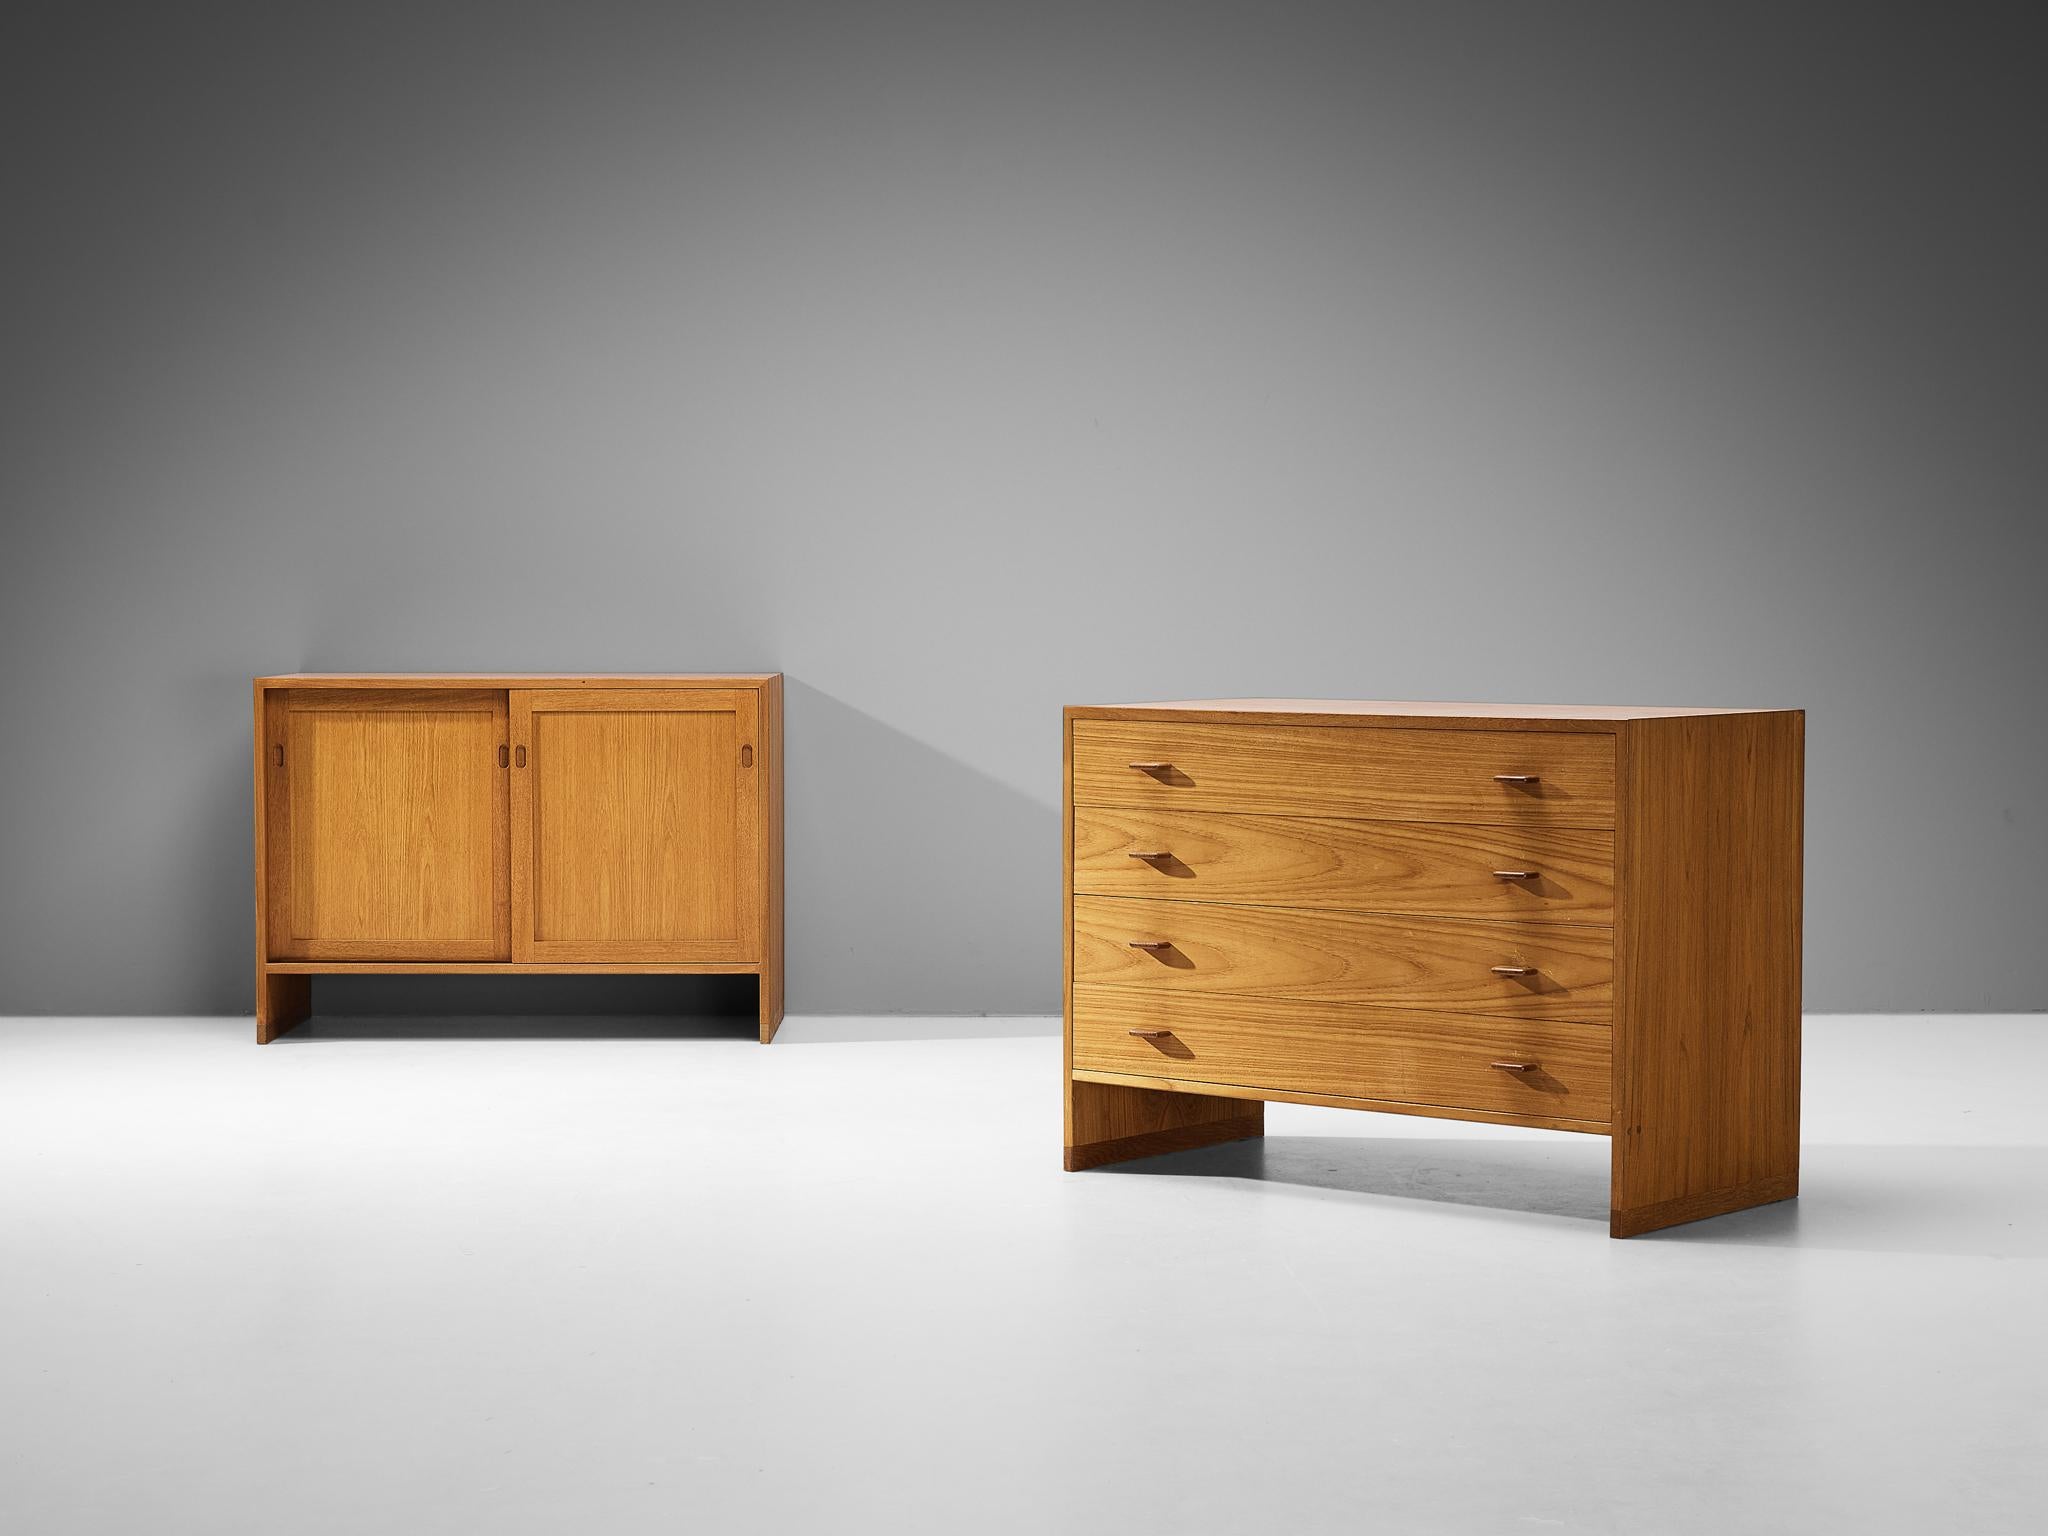 Hans J. Wegner for Ry Møbler, pair of cabinets, model 'RY100', teak, oak, maple, Denmark, 1960

This set consists of two cabinets, each with its own layout and construction. Both are symmetrically structured and defined by the clear lines and the